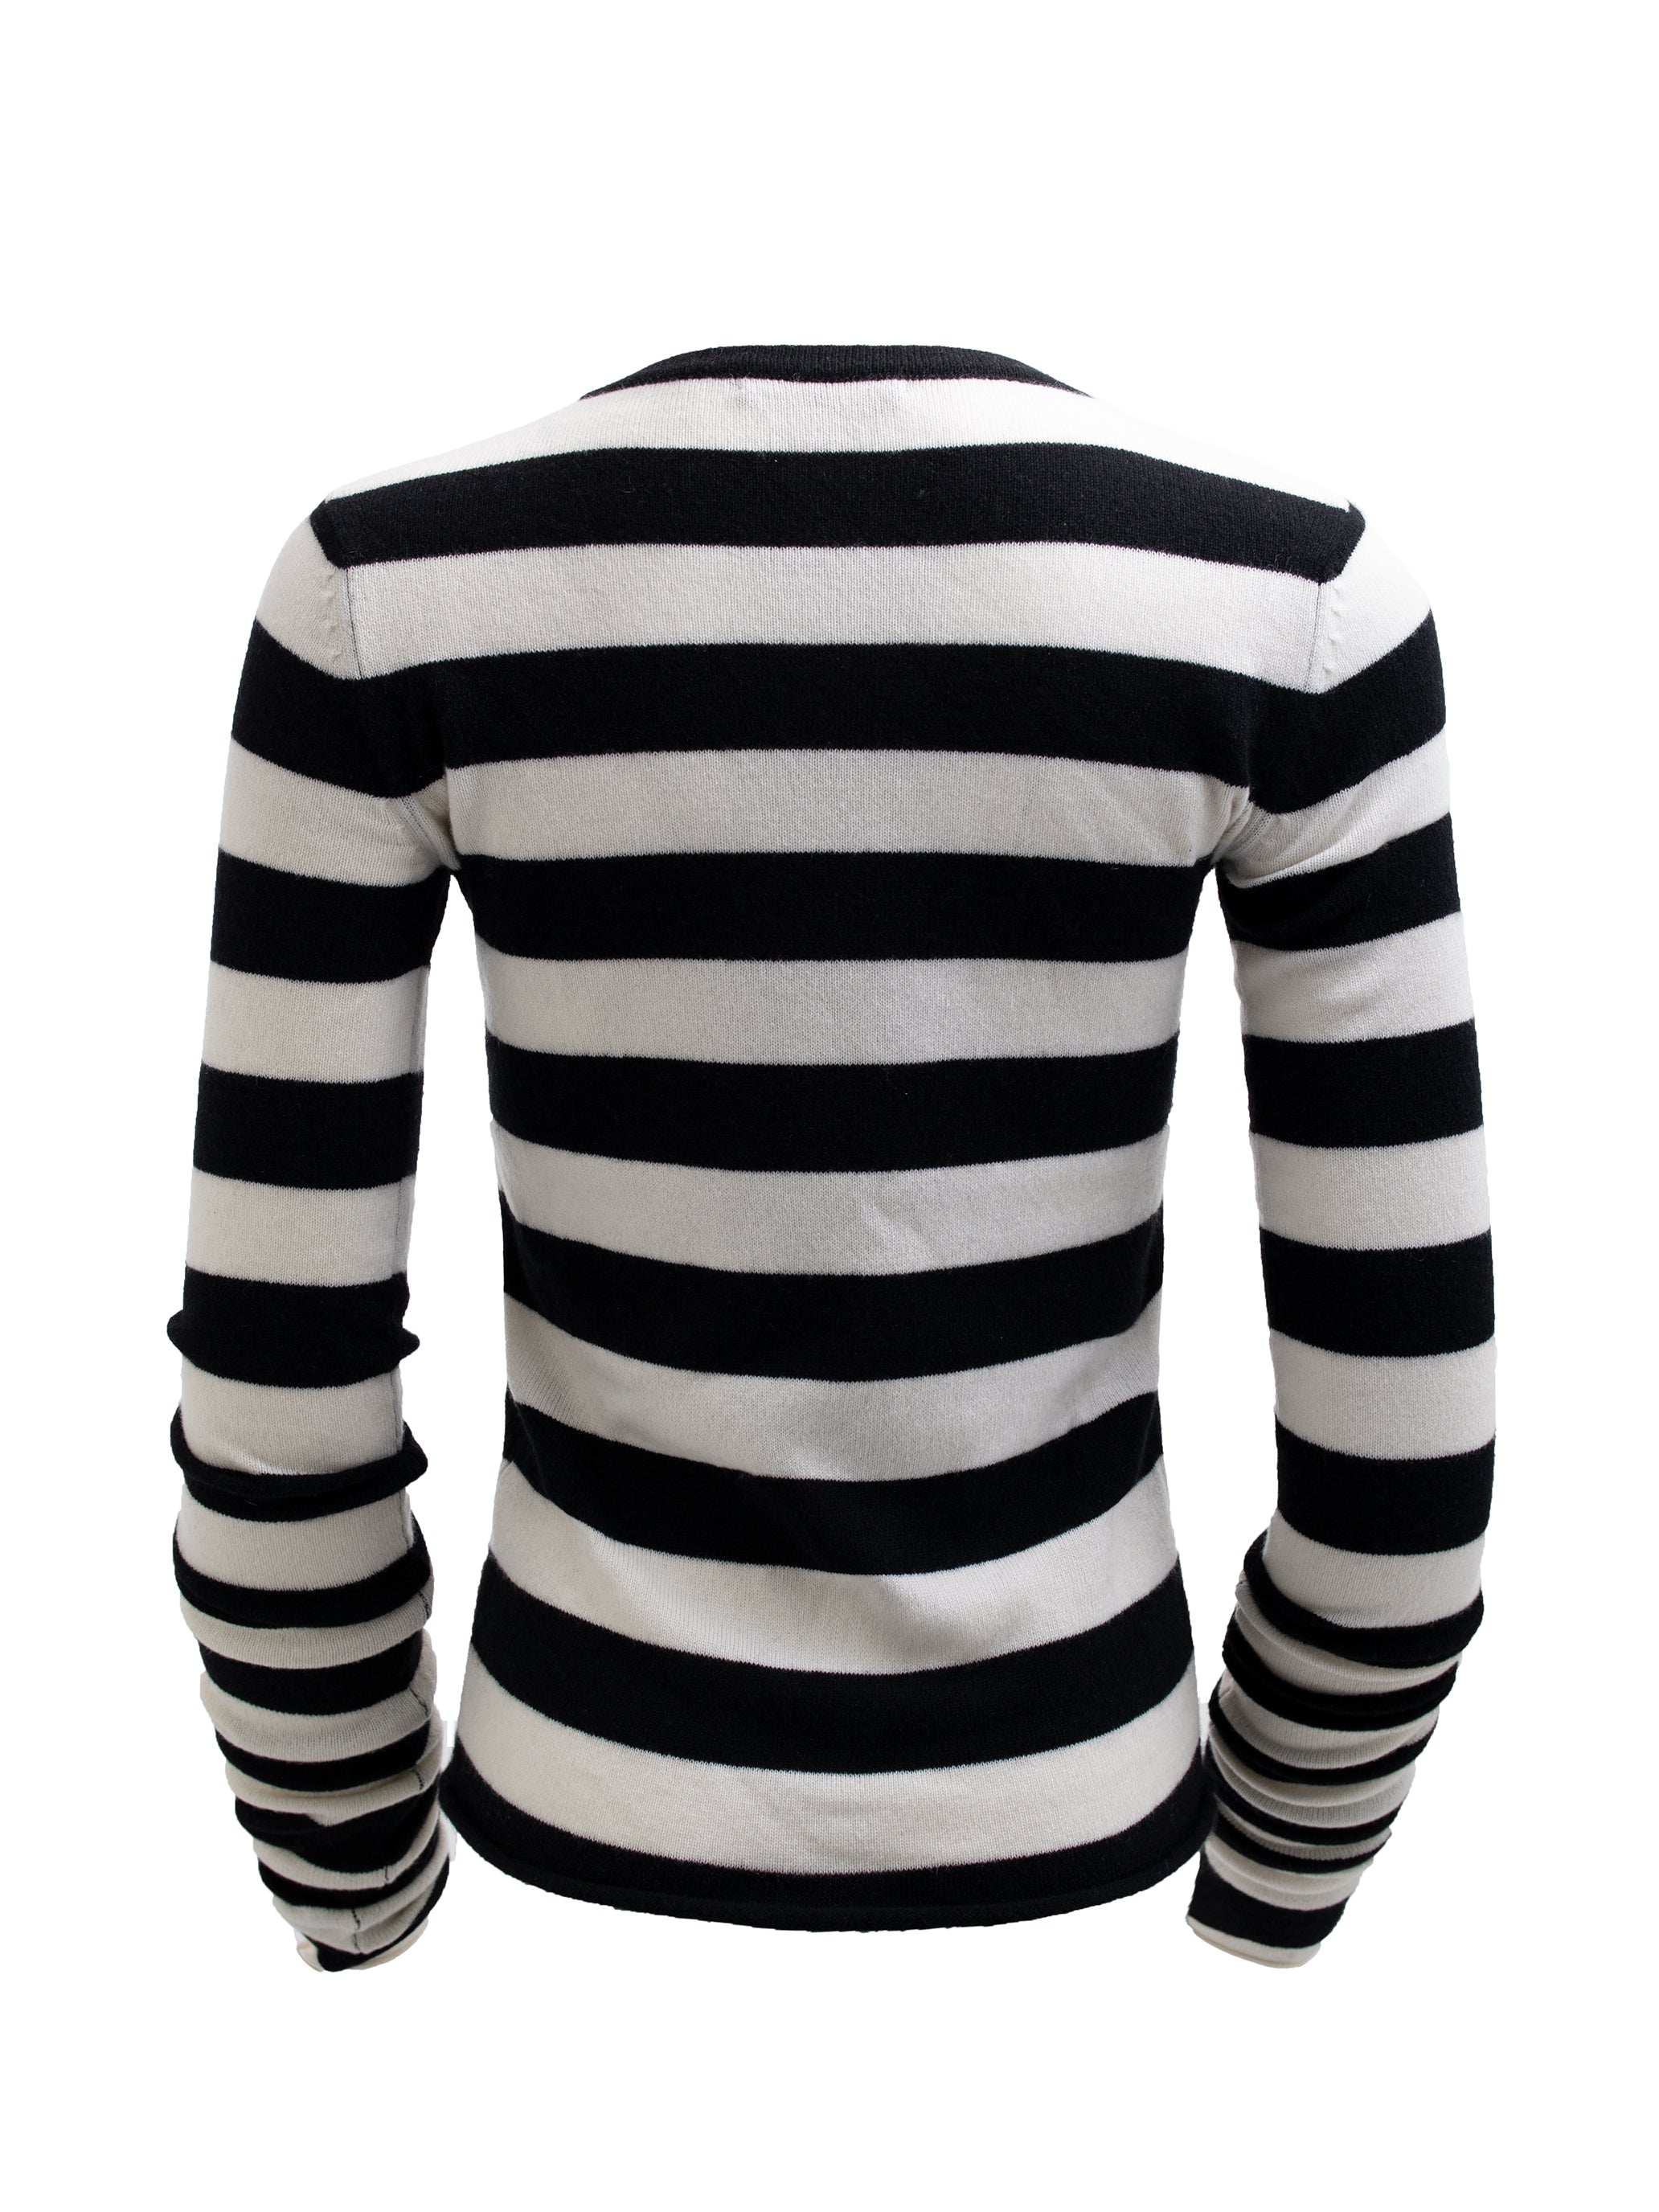 BLACK AND CREAMY LONG SLEEVED STRIPED CASHMERE JUMPER